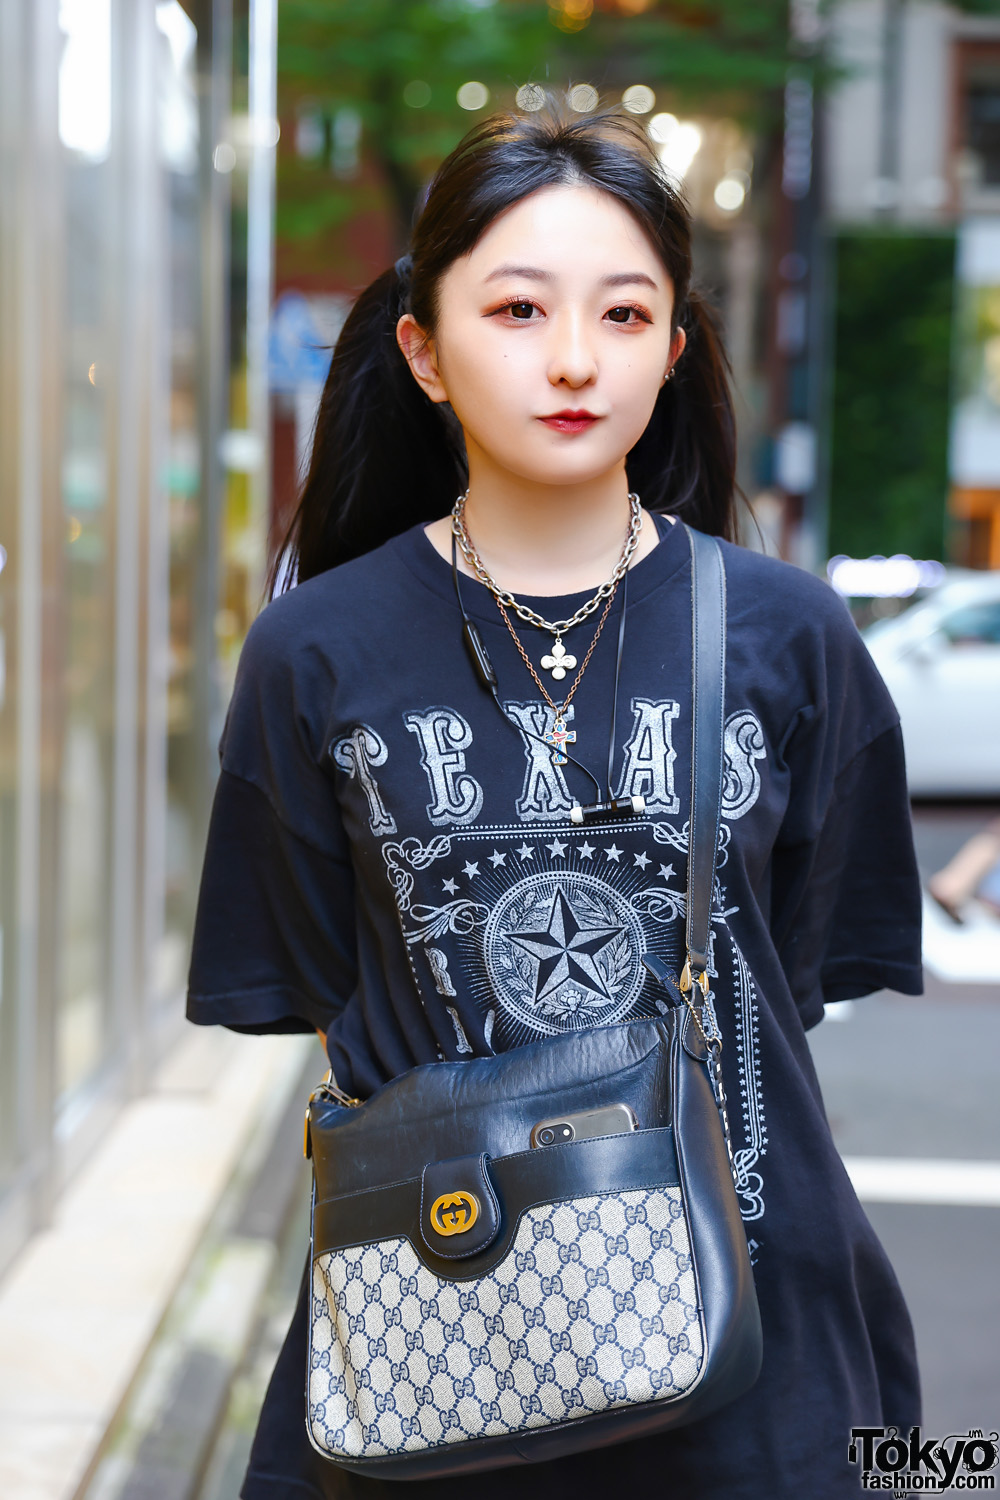 Casual Tokyo Style w/ Twin Tails, Layered Necklaces, Kinji Texas T